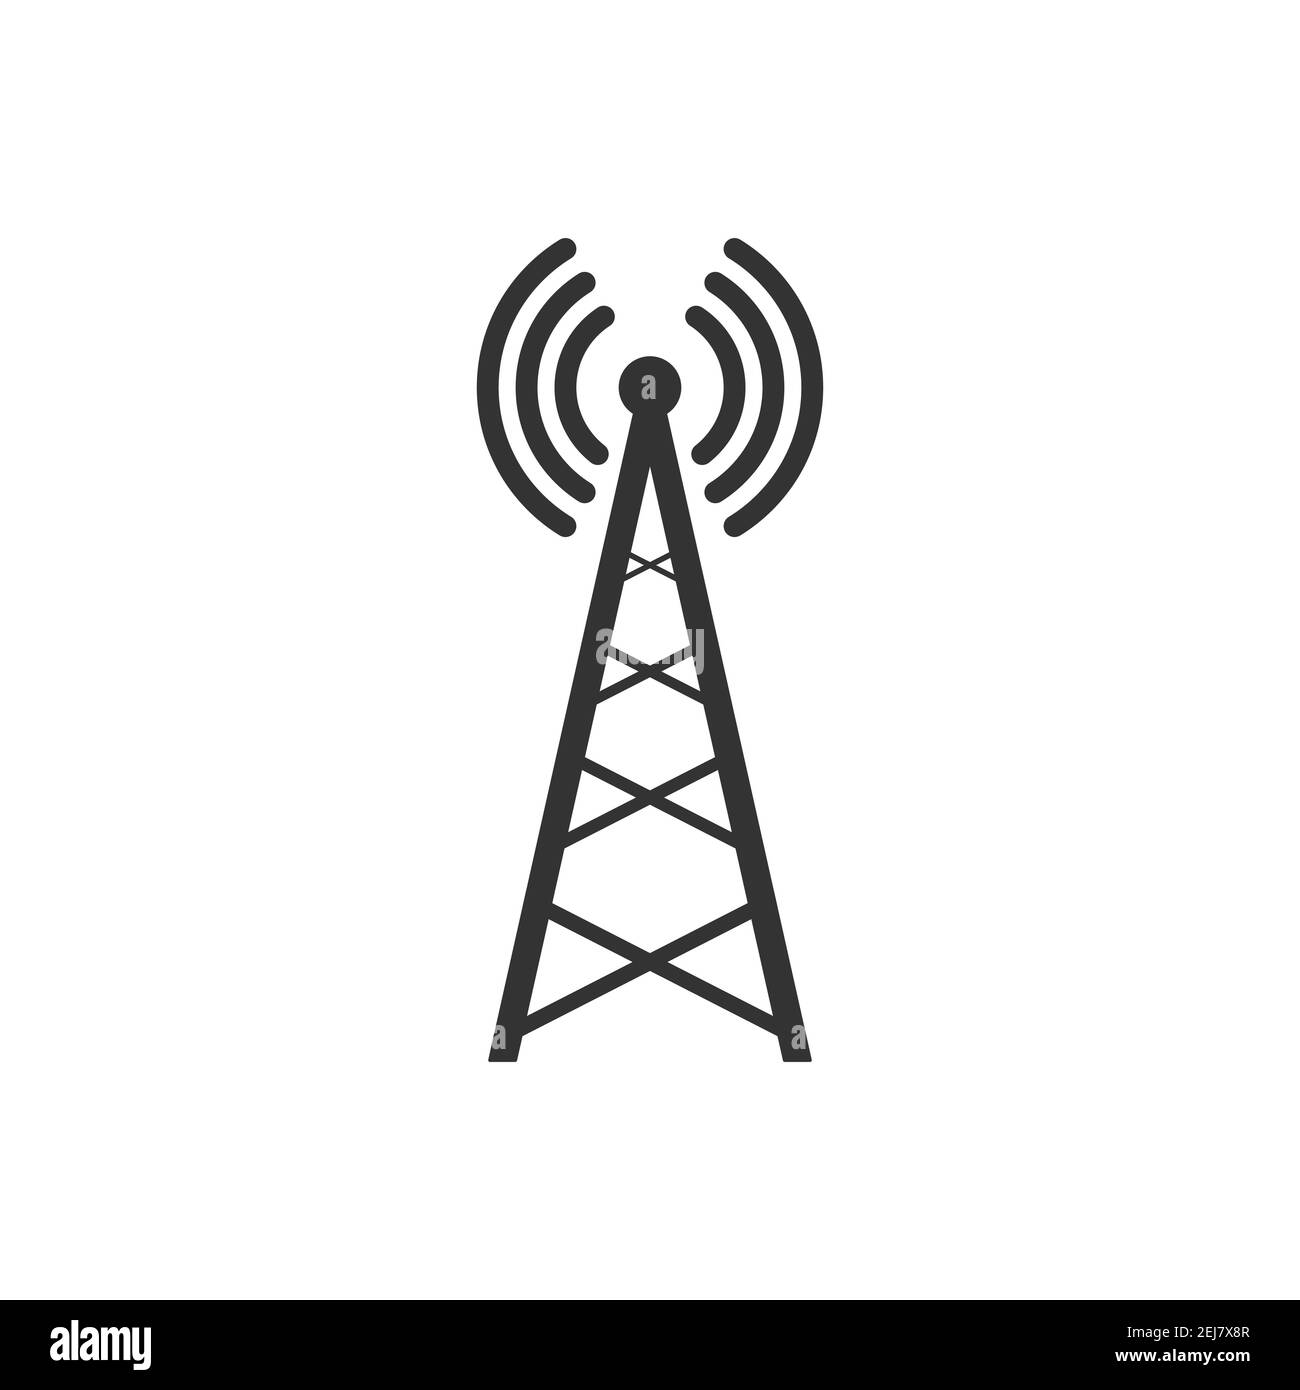 Transmitter antenna icon. Broadcast tower symbol. Wireless technology equipment. Vector isolated on white Stock Vector